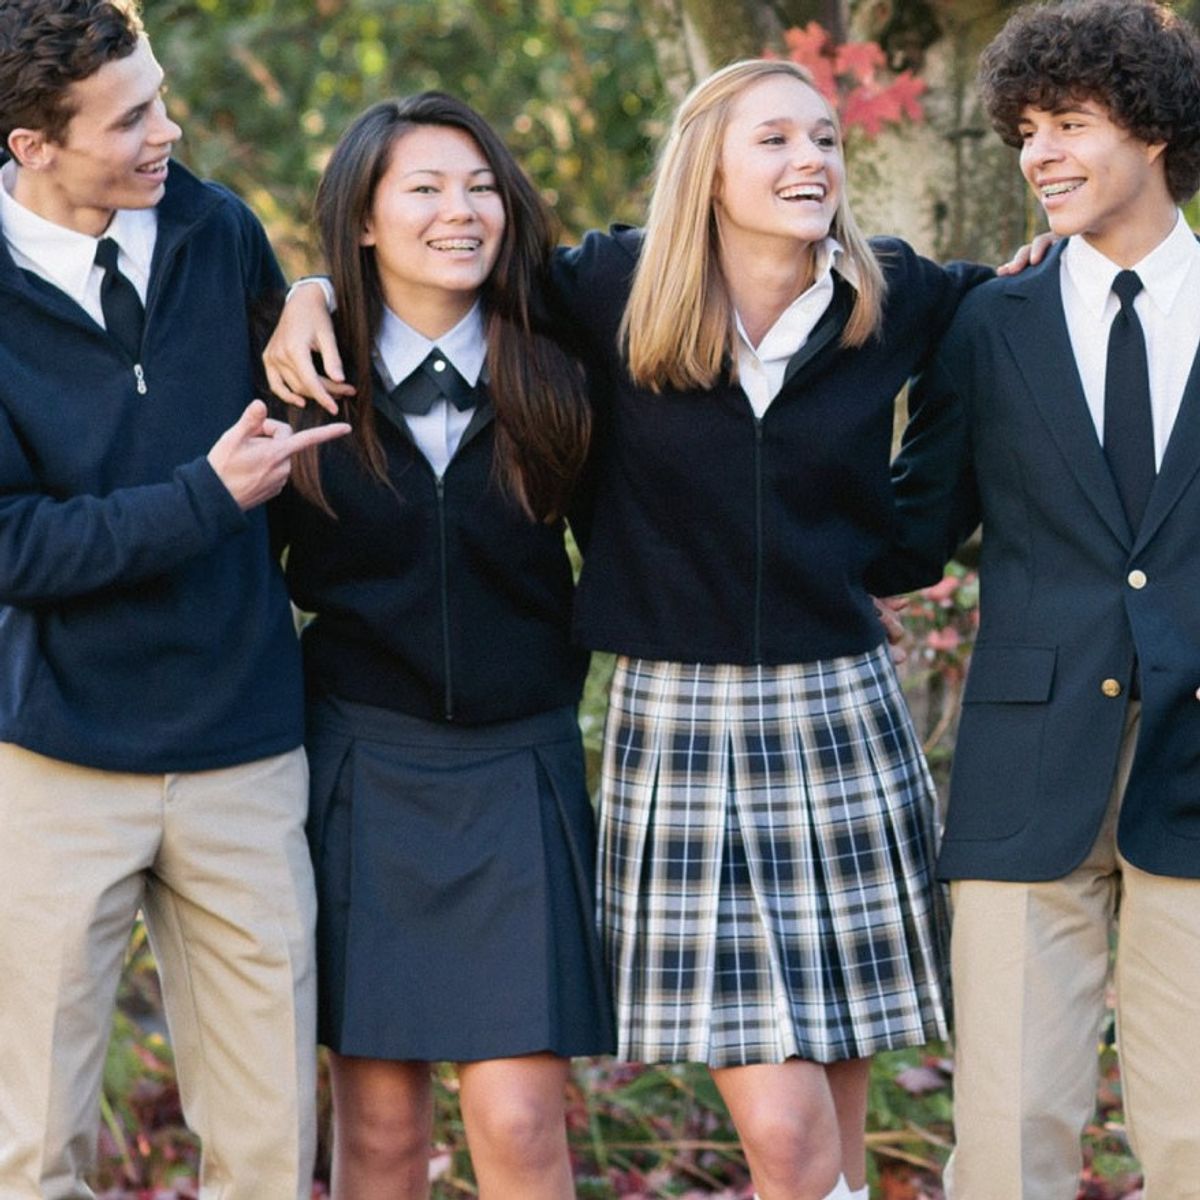 10 Signs You Went To A Private High School